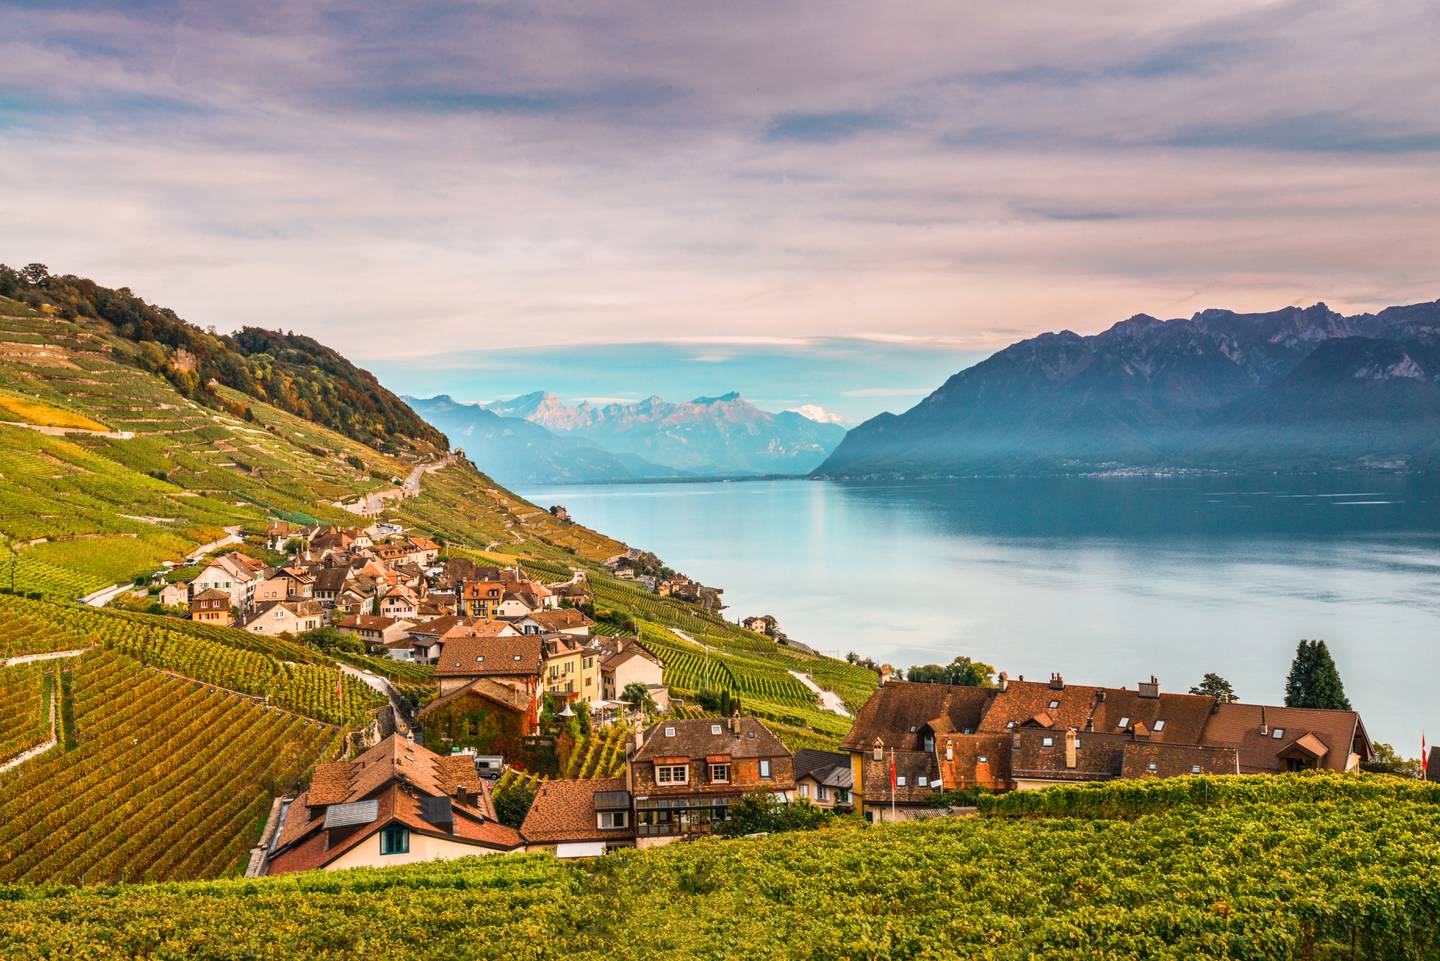 The vineyards of Lavaux, Switzerland. Photo: AllDetails / Maude Rion